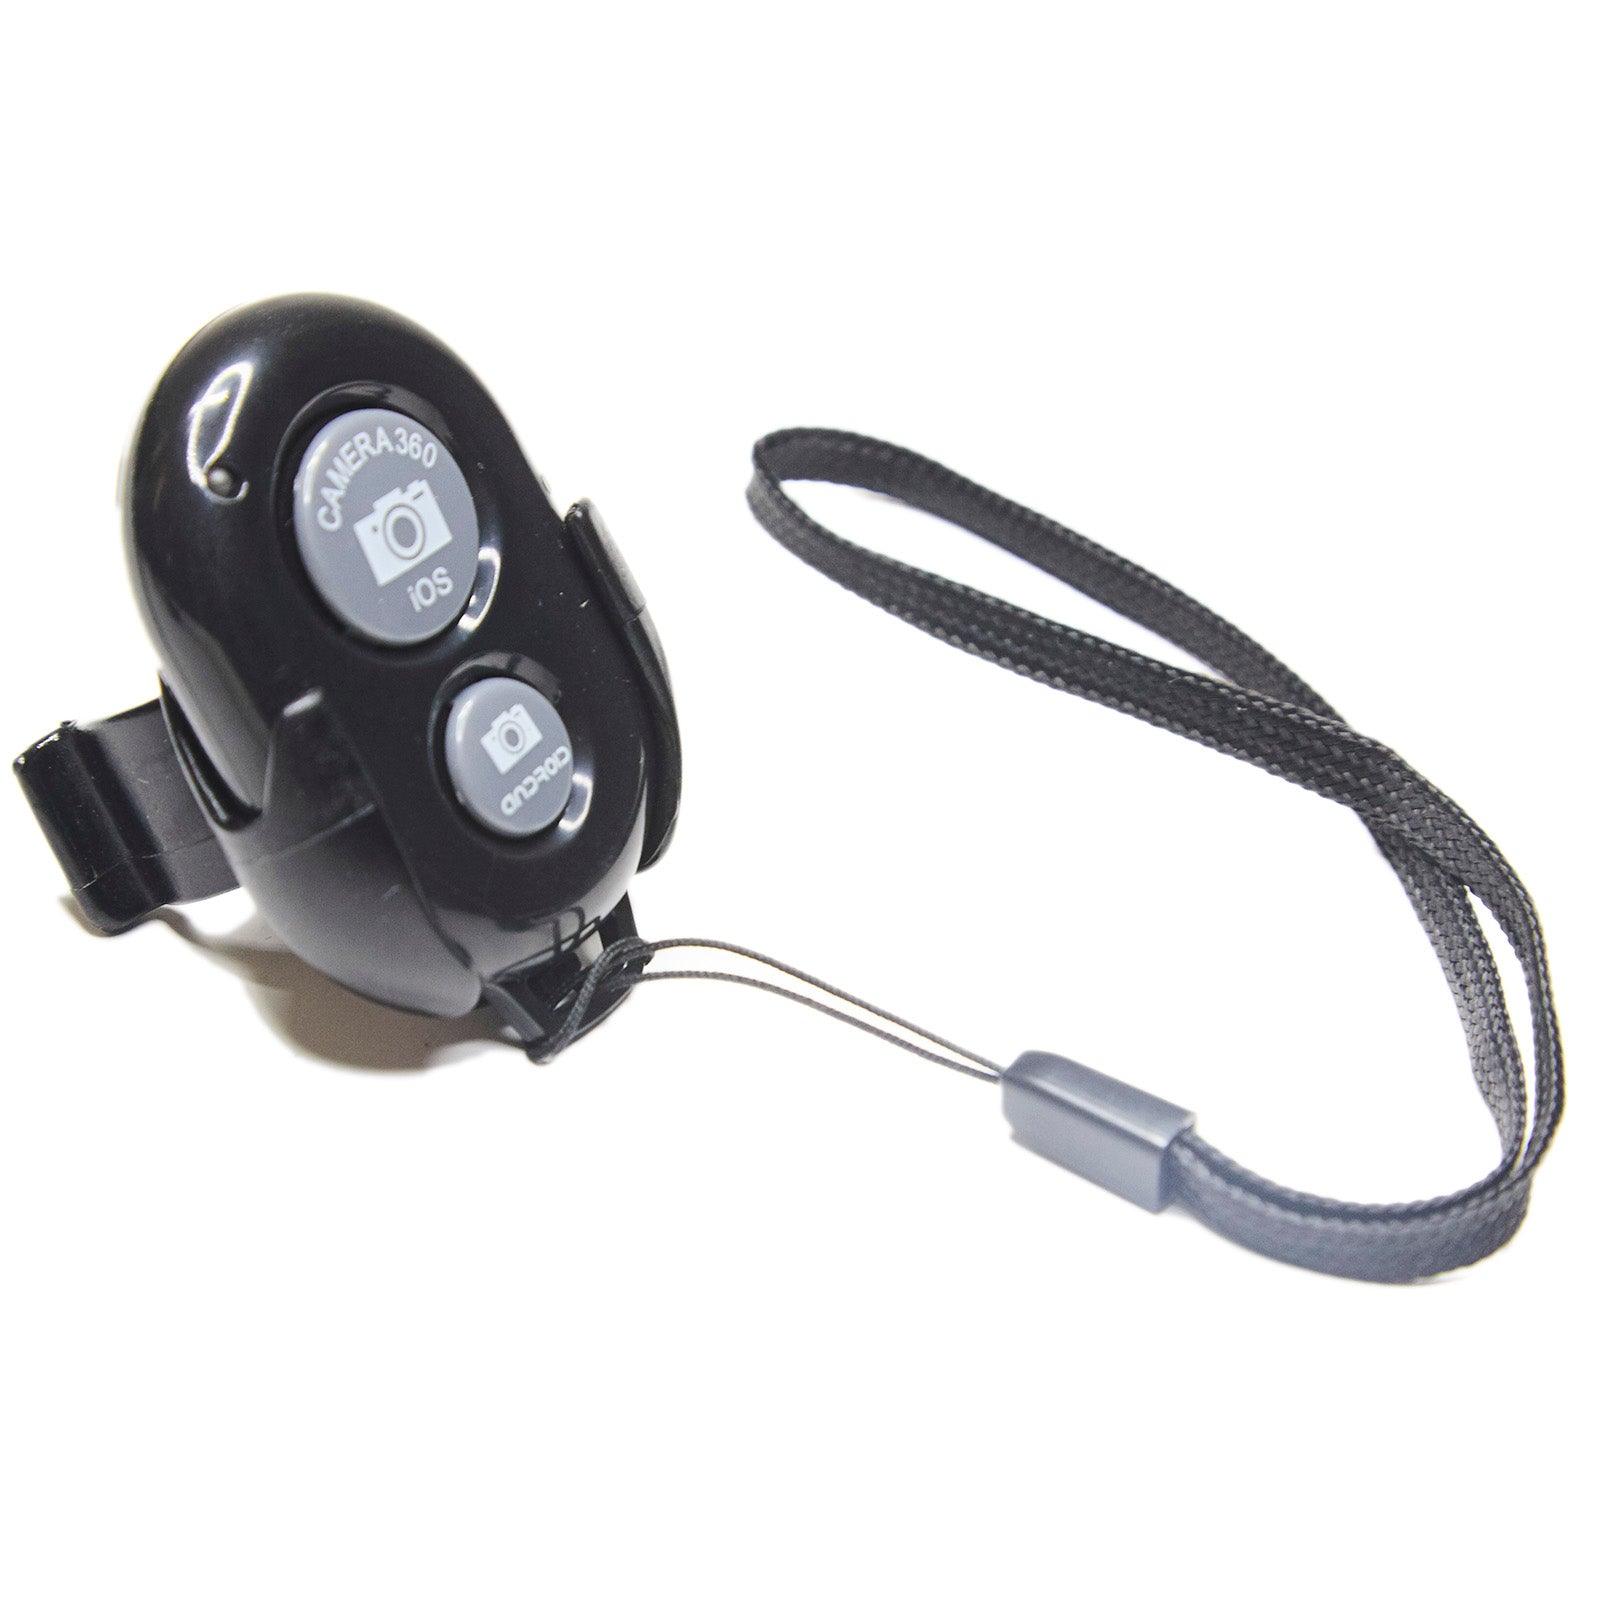 Includes Bluetooth shutter remote, mounting clip, and strap